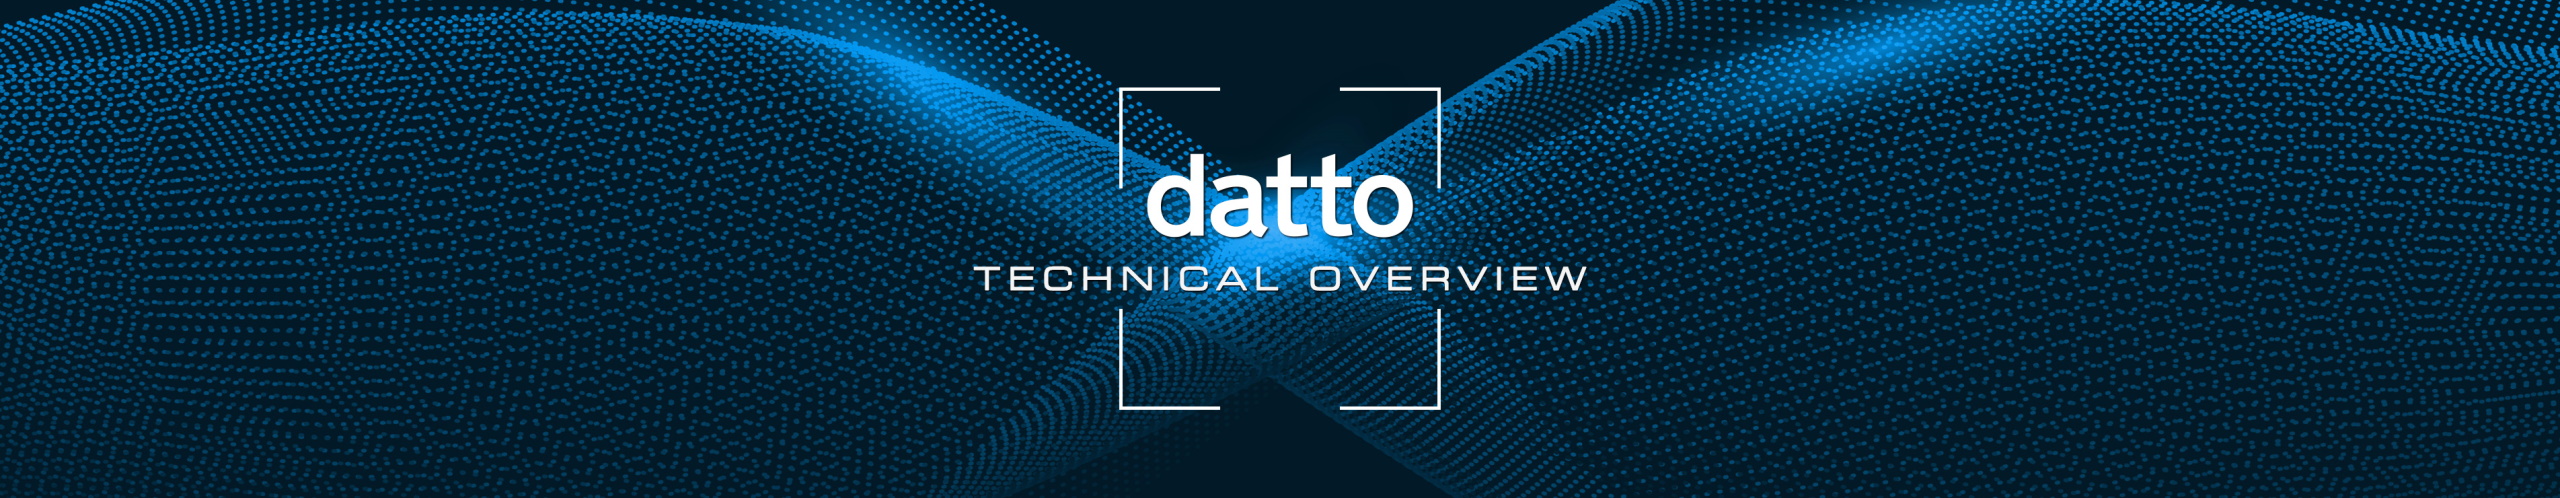 Datto BCDR Technical Overview